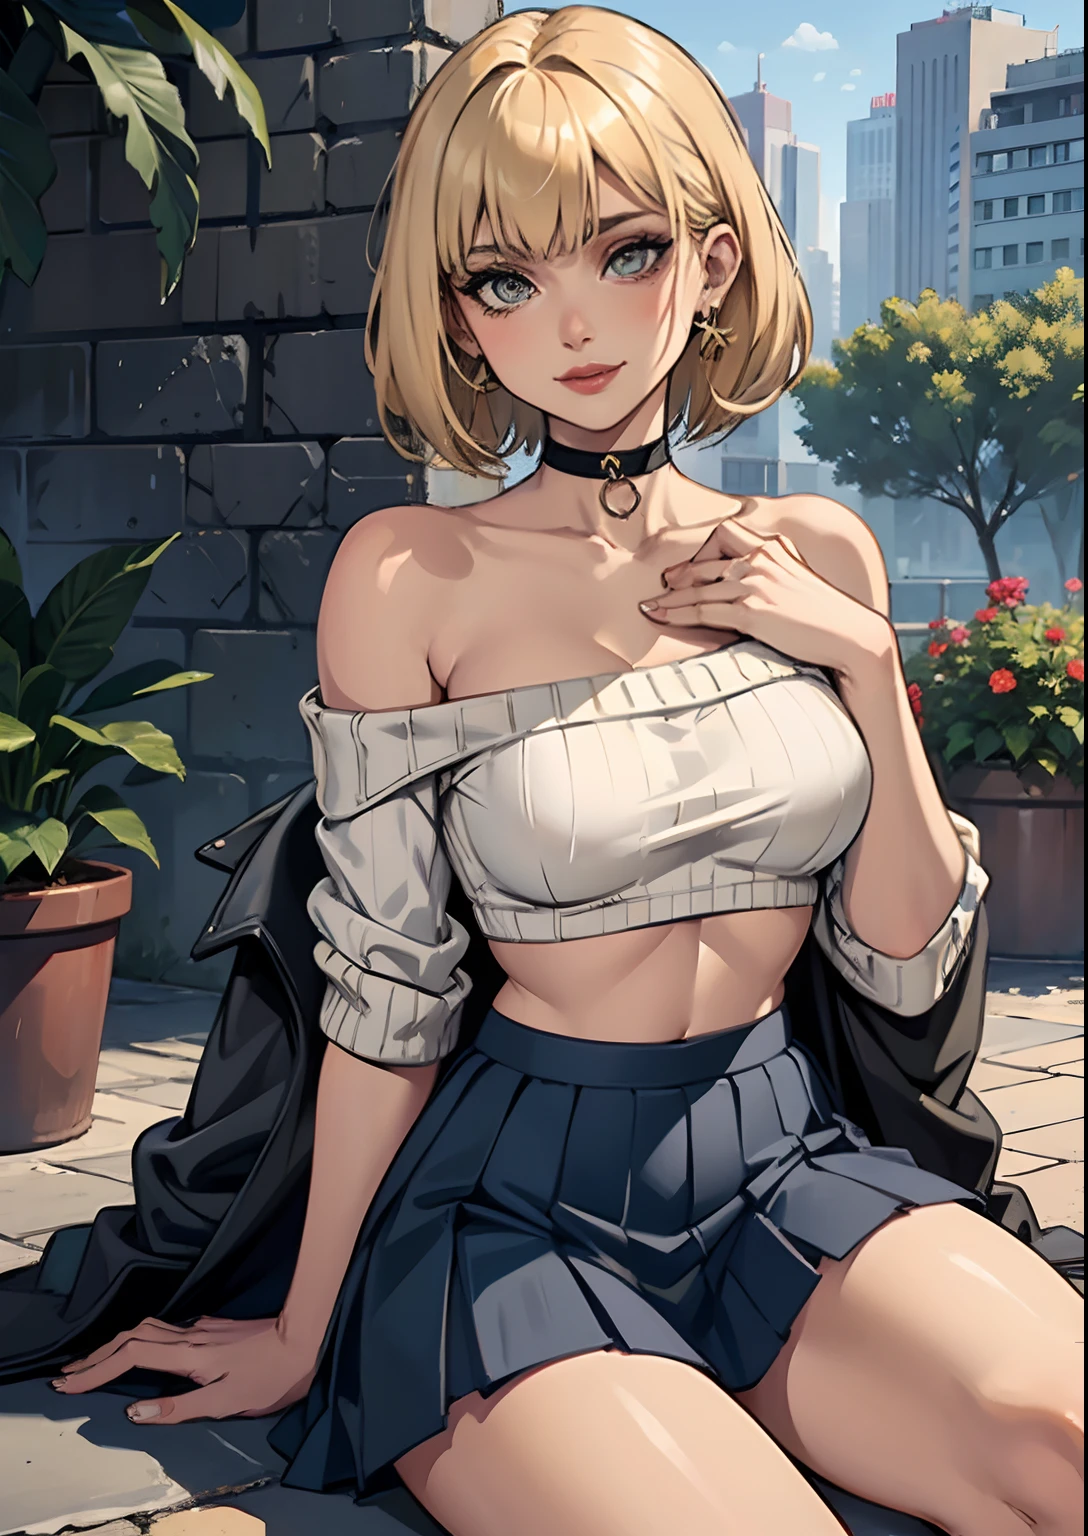 1girl, bangs, black_choker, blonde_hair, blue_skirt, bush, choker, collarbone, day, earrings, flower, jewelry, lips, looking_at_viewer, outdoors, plant, pleated_skirt, potted_plant, road,shirt, short_hair, short_sleeves, sitting, skirt, smile, solo, stairs,skimpy outfit,legs up,lewd pose,crop top(naval ring piercing)(bellybutton silver piercing)(yellow blonde hair)(blonde loose hair)(small perky boobs)(off-shoulder sweater over crop top)(sweater over top)